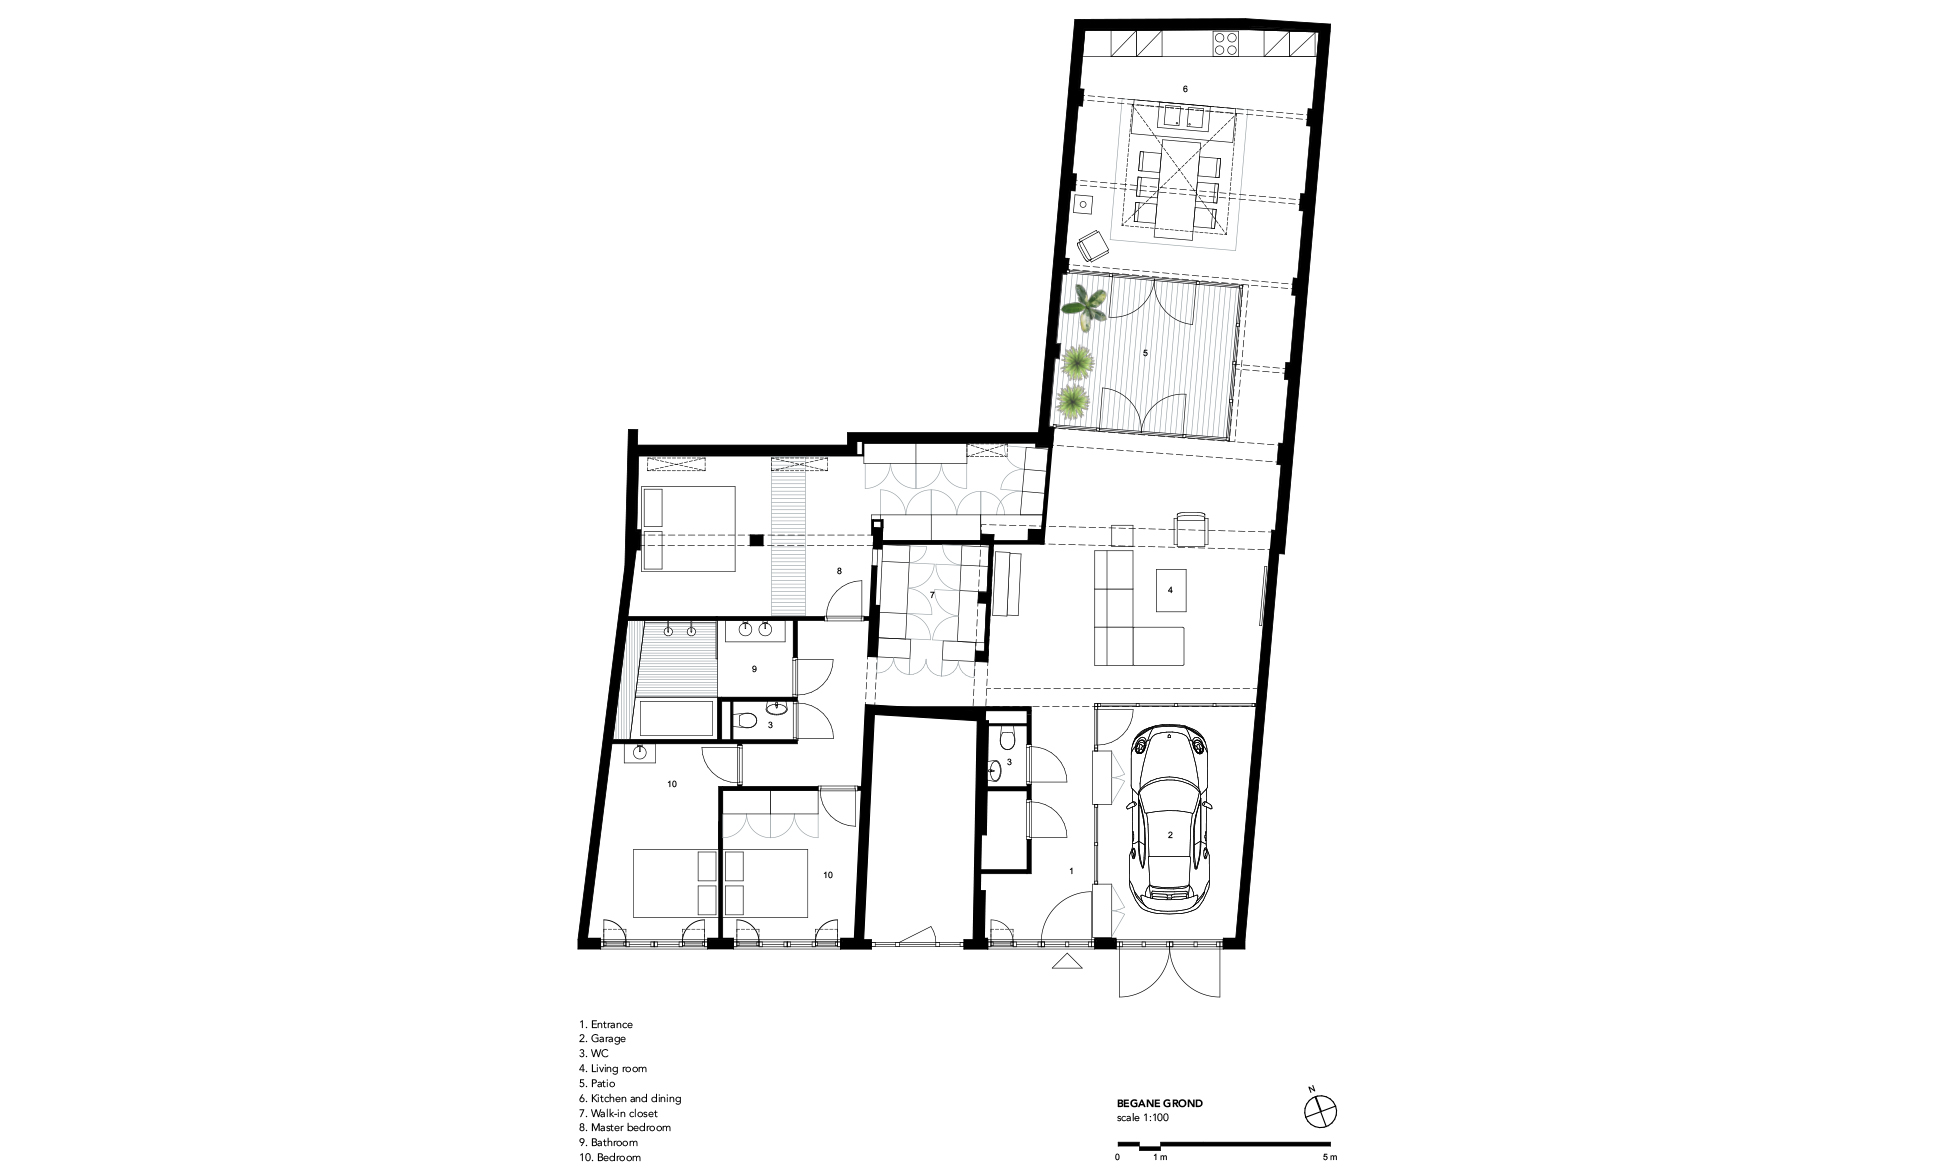 Drawing floorplan residential architecture with openable green patio and Porsche parking in living a bespoke design and built by MOST Architecture, Rotterdam